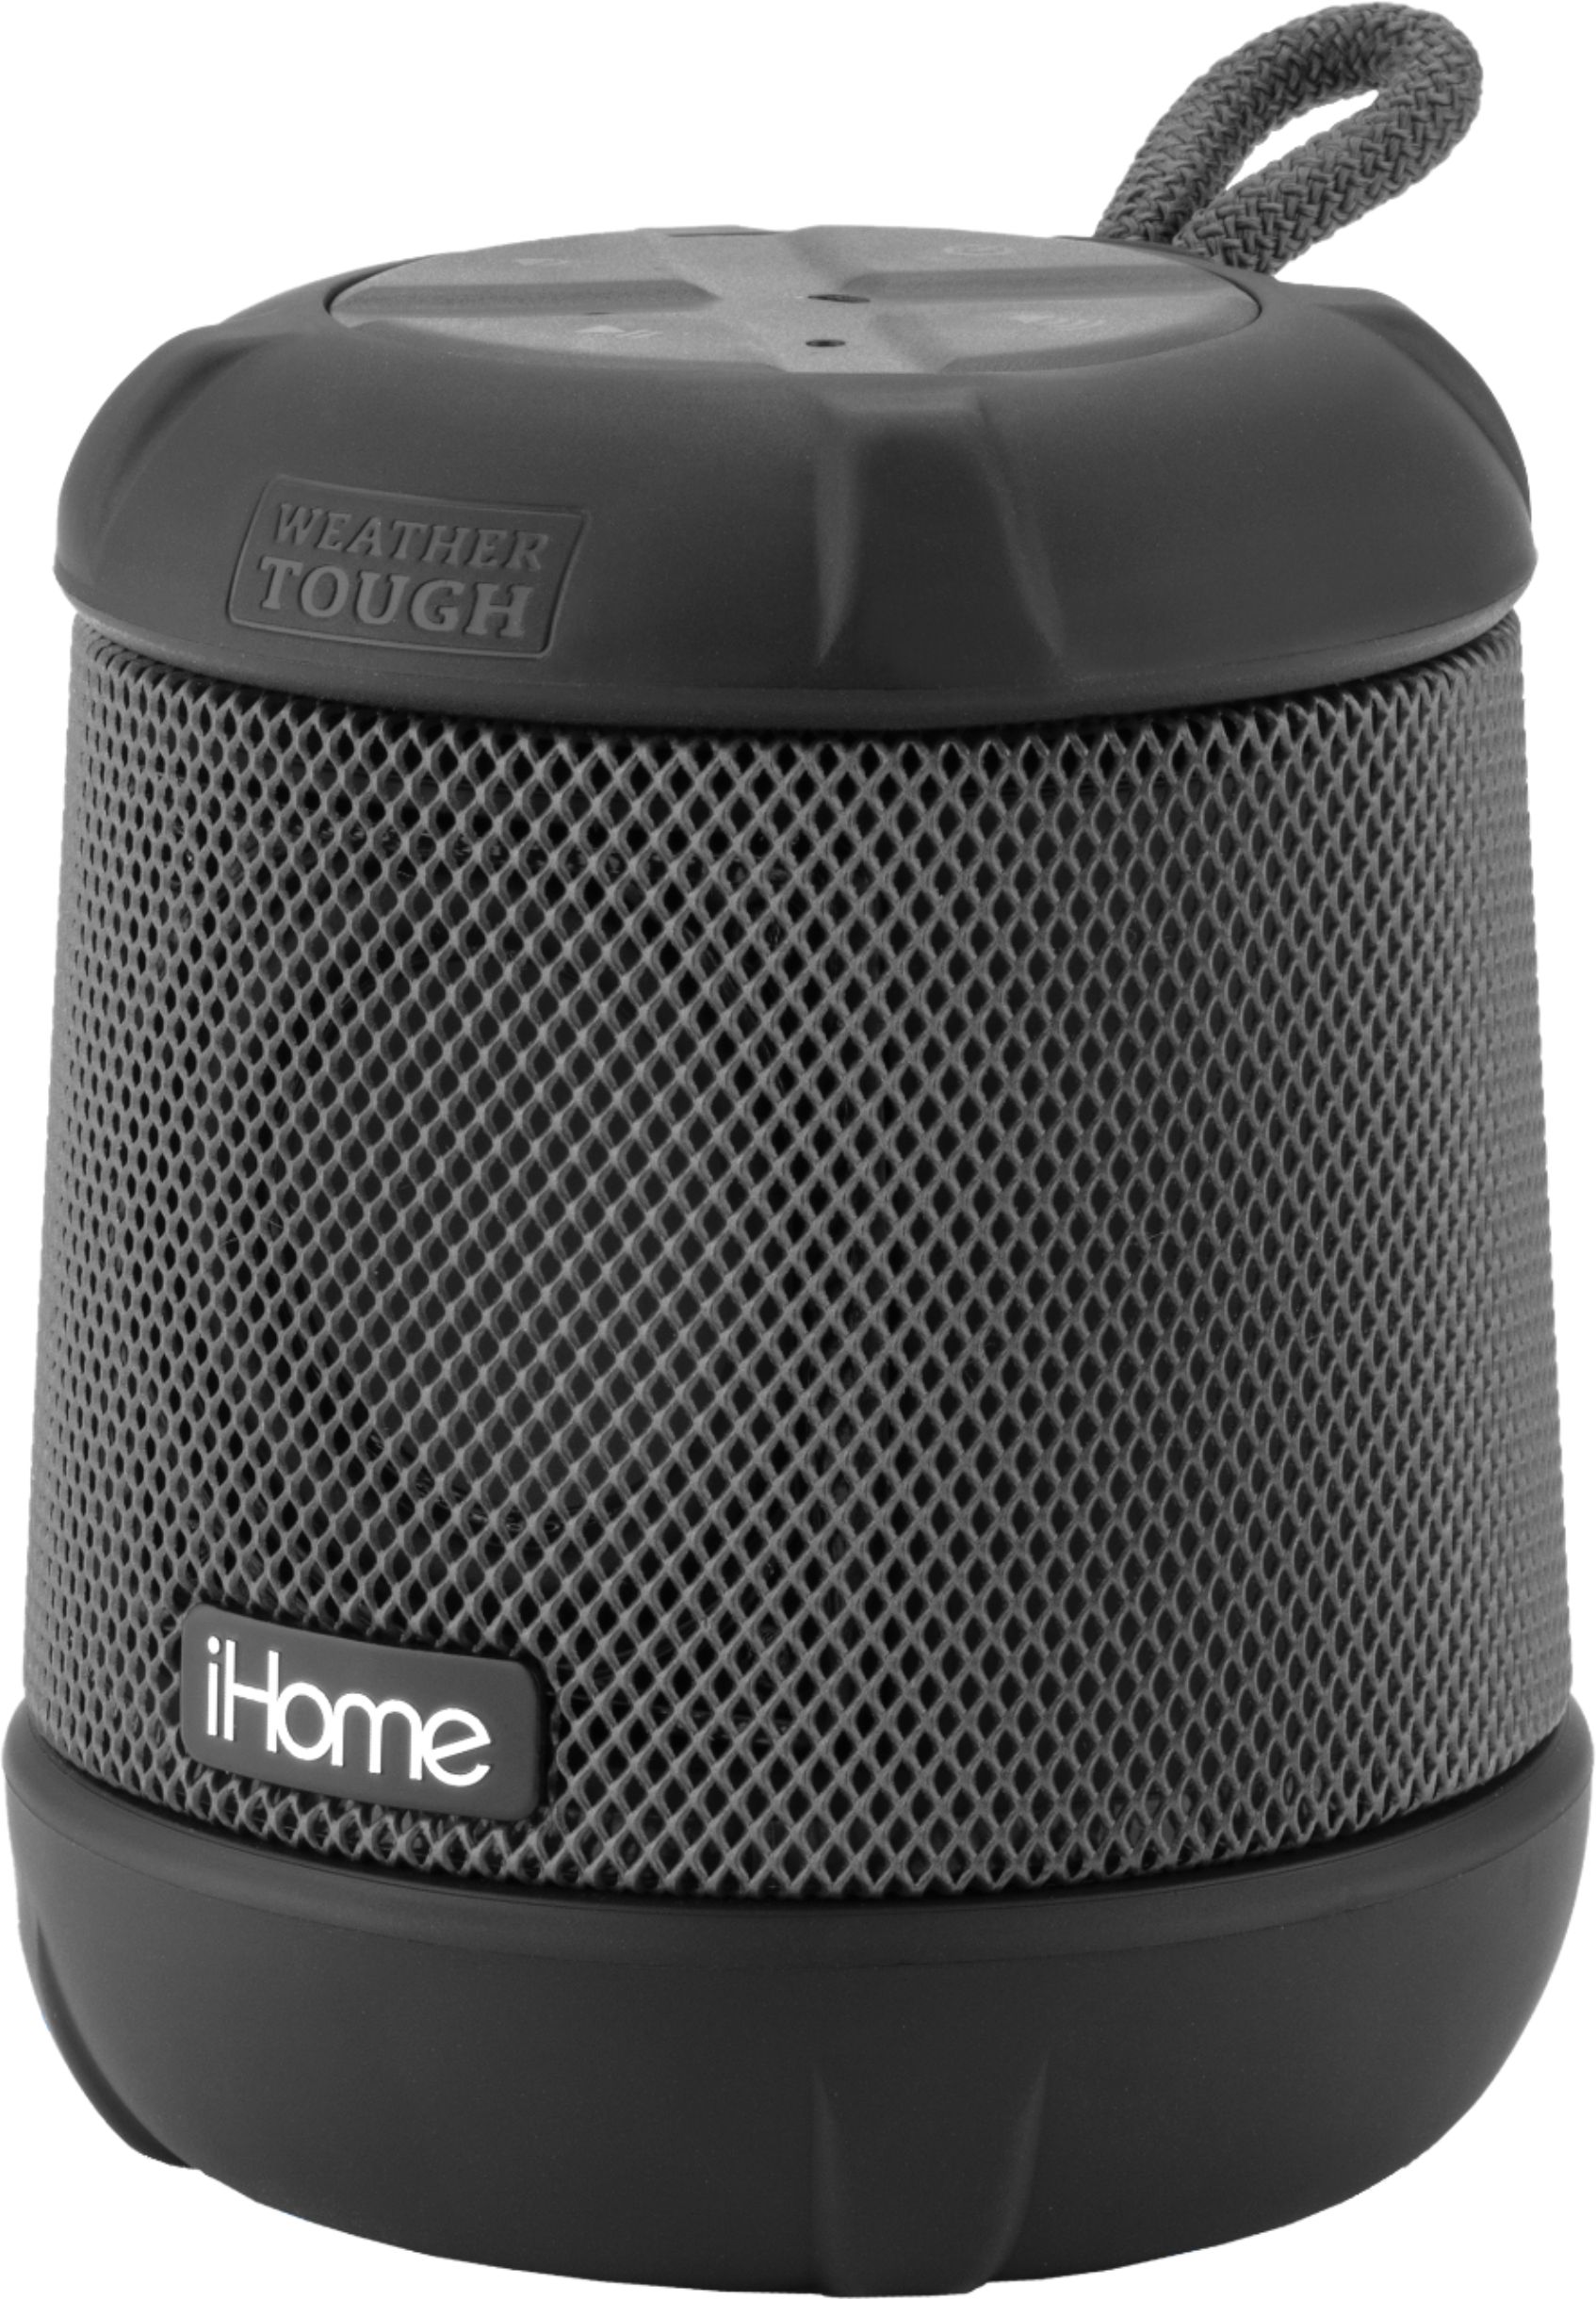 Angle View: iHome - PlayTough Pro - Bluetooth Rechargeable Waterproof Portable Speaker with 360° Stereo Sound - Black